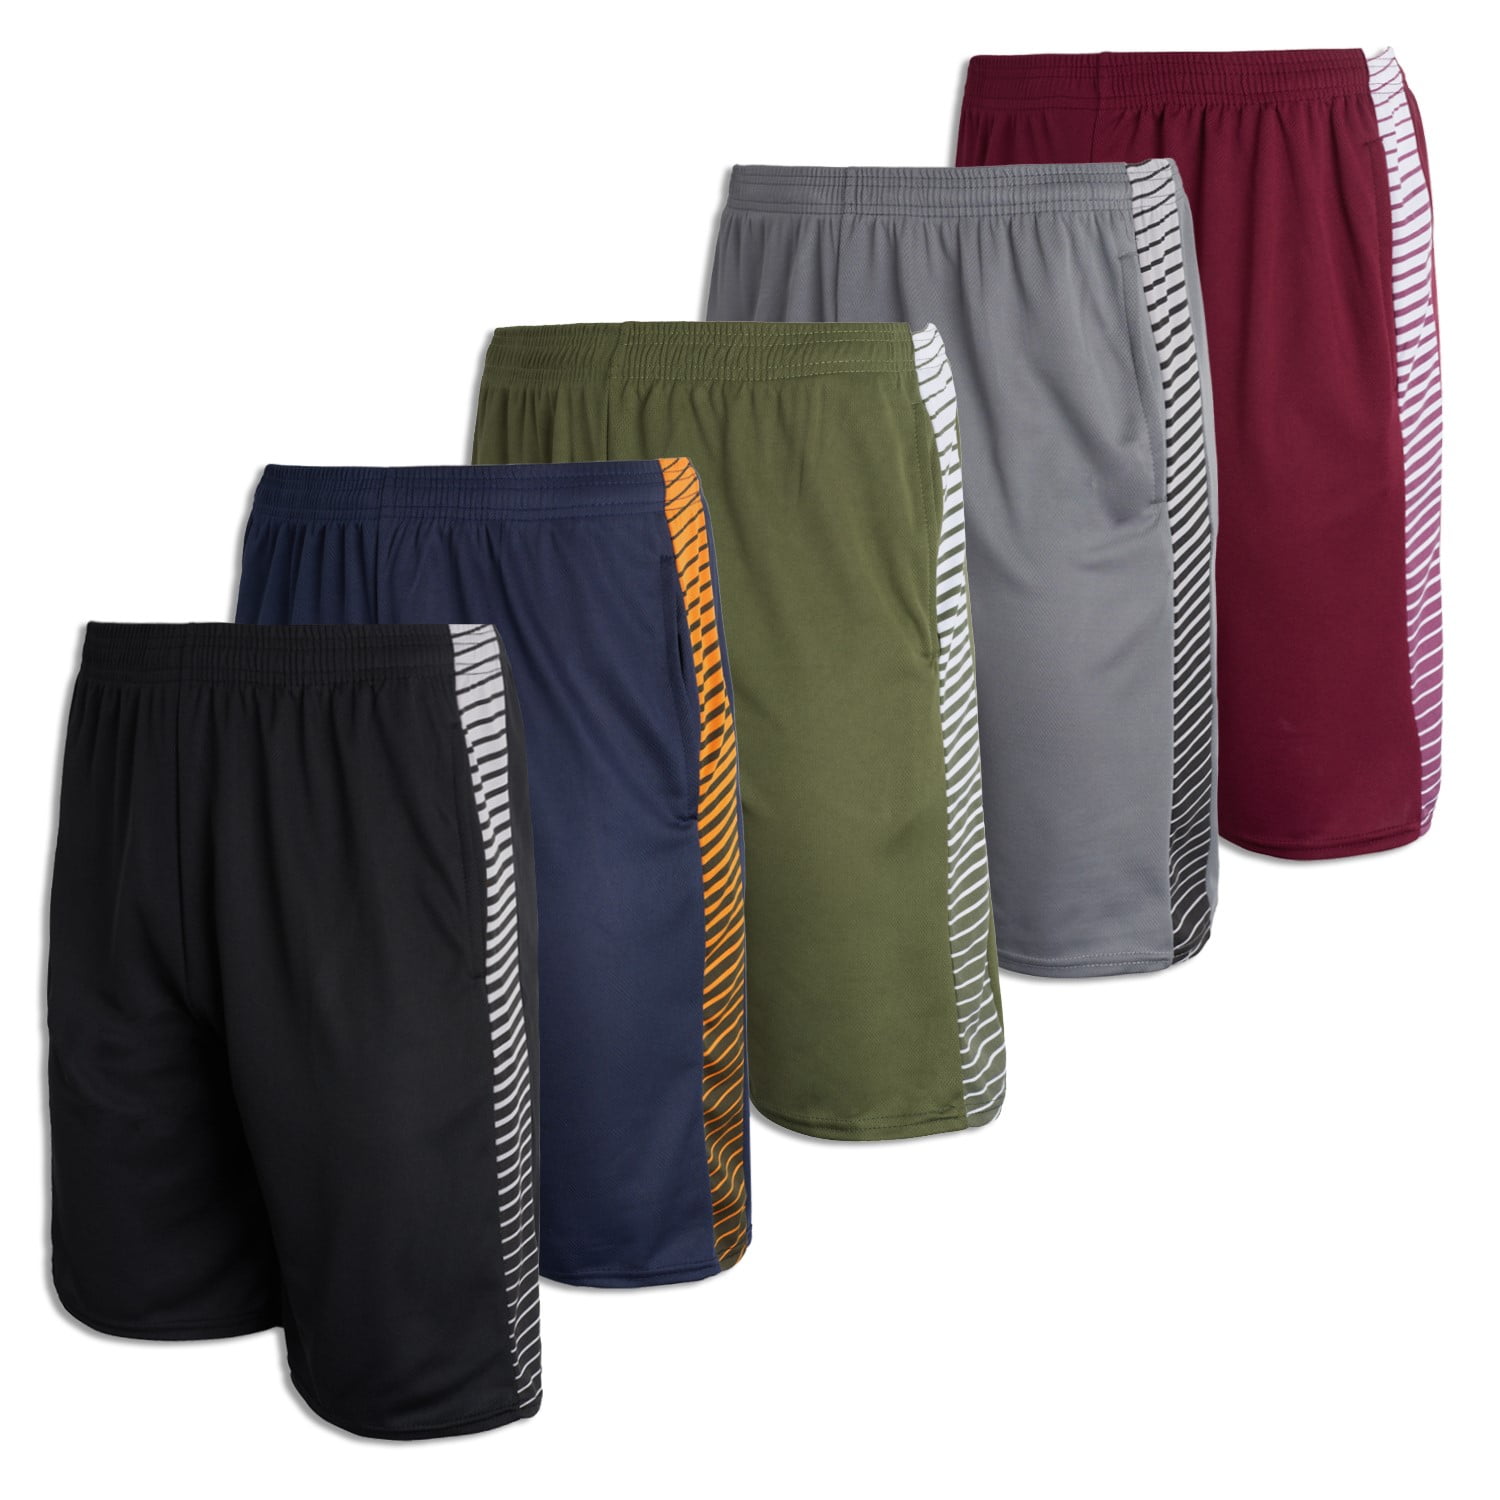 5 Pack: Men's Mesh Athletic Performance Gym Shorts with Pockets (S-3X ...